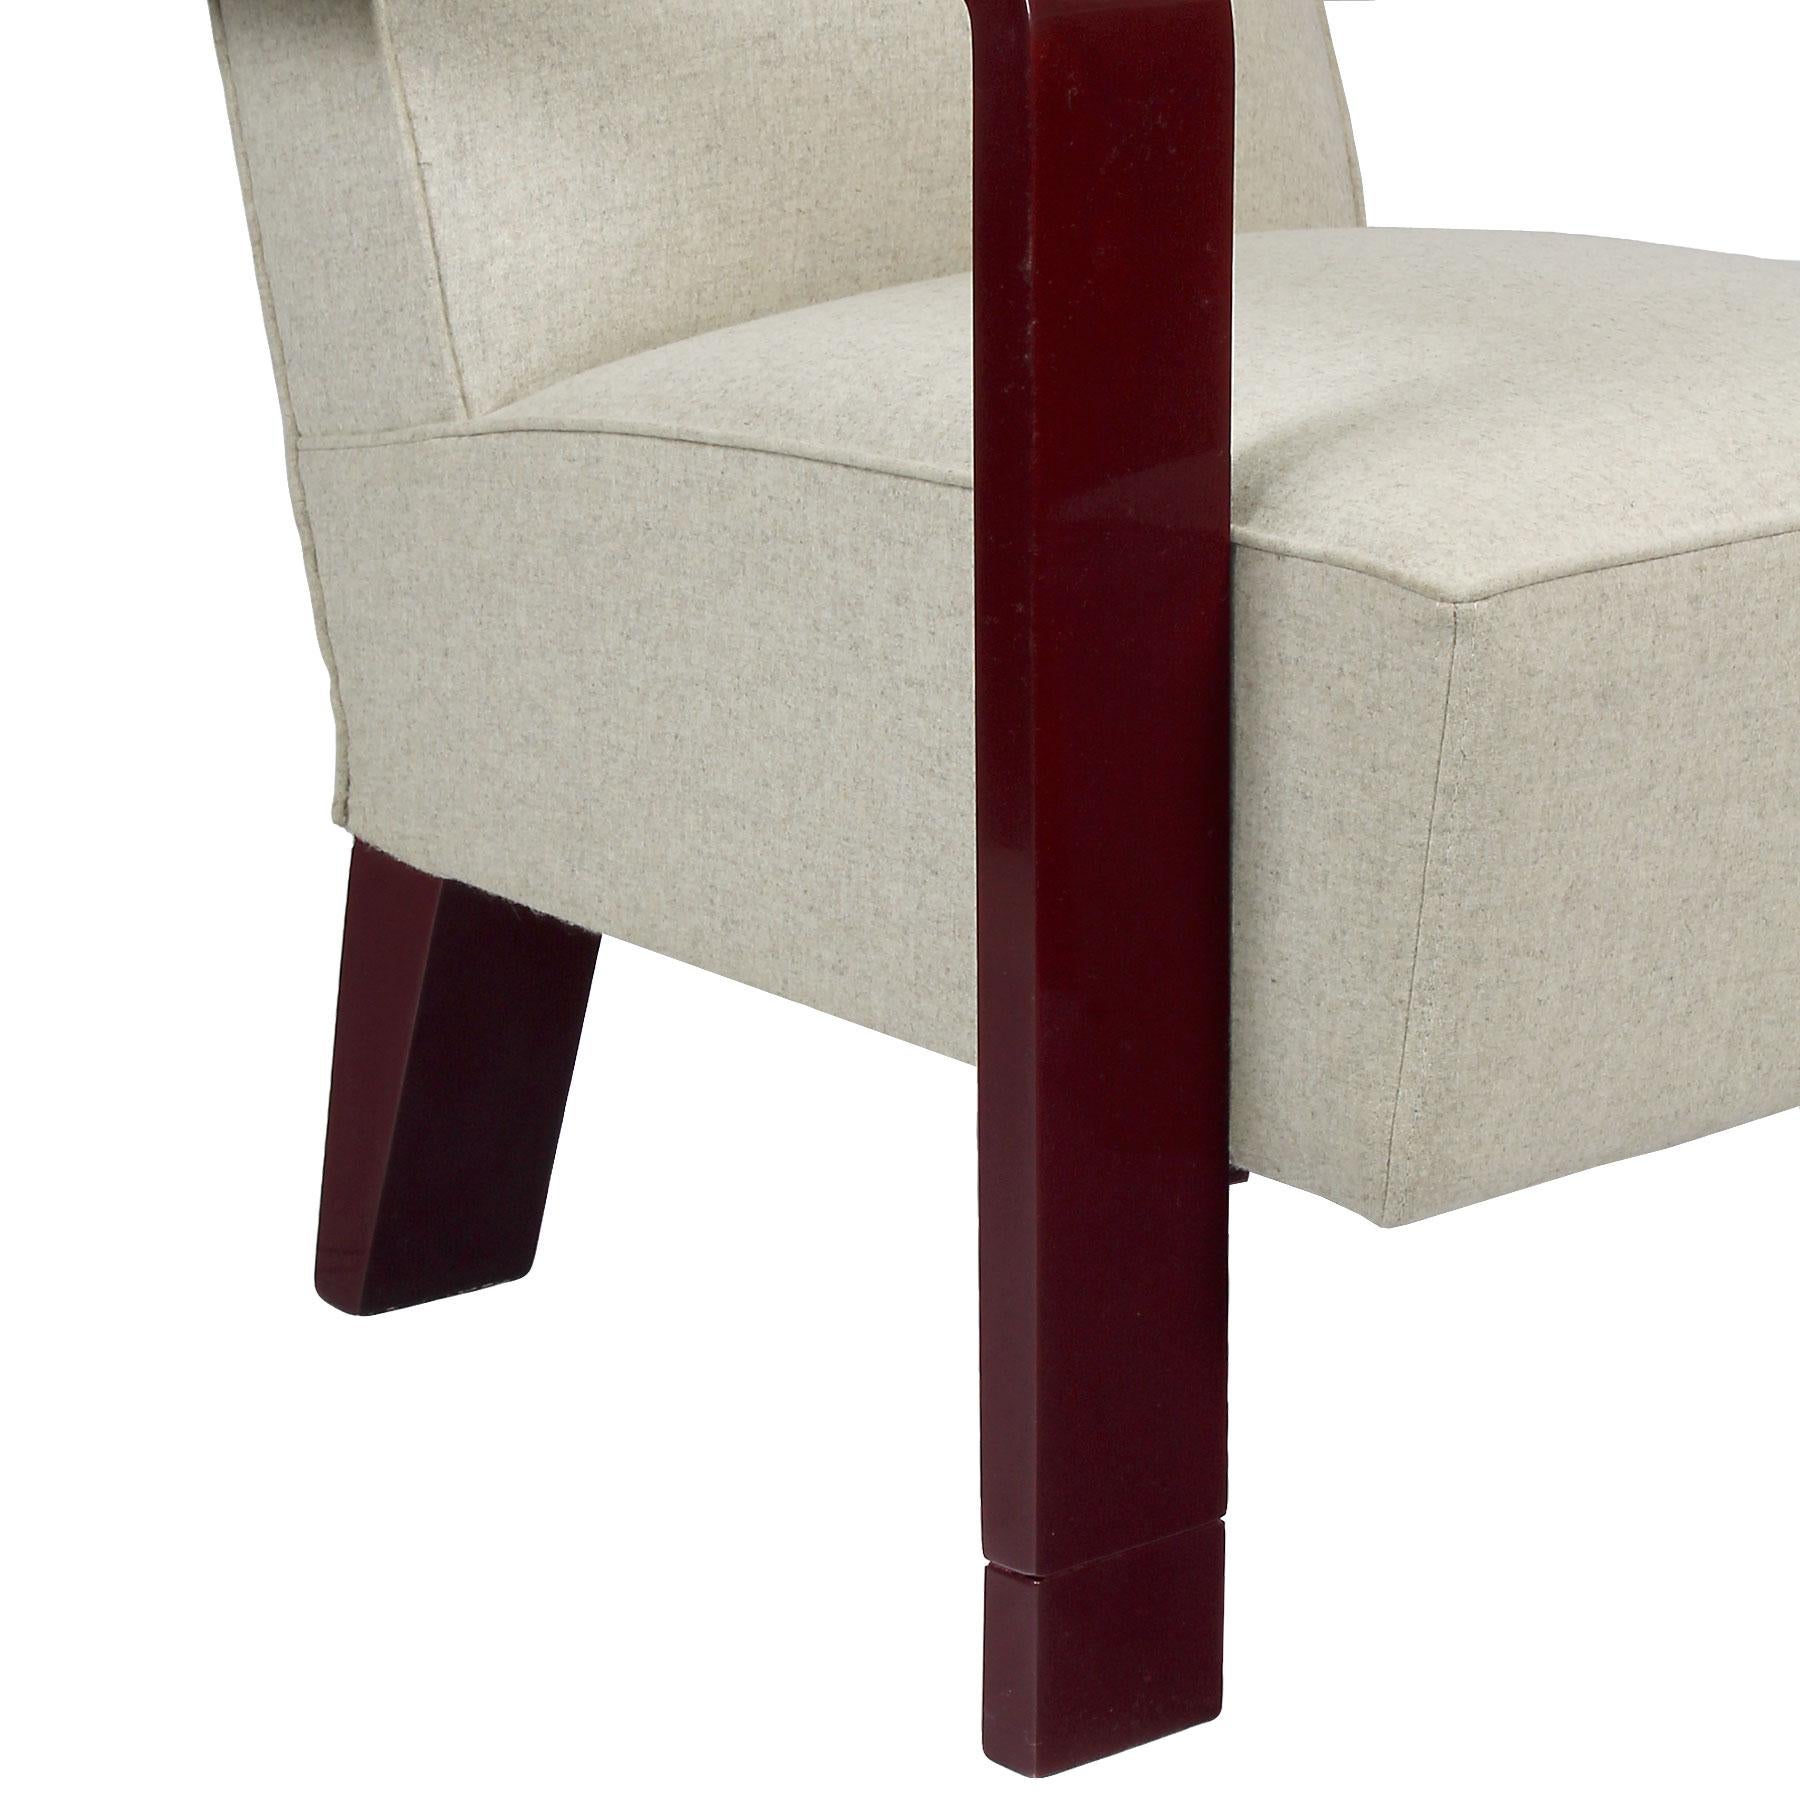 1930s Art Deco Armchair, Lacquered Beech, Off-White Wool - Belgium For Sale 3